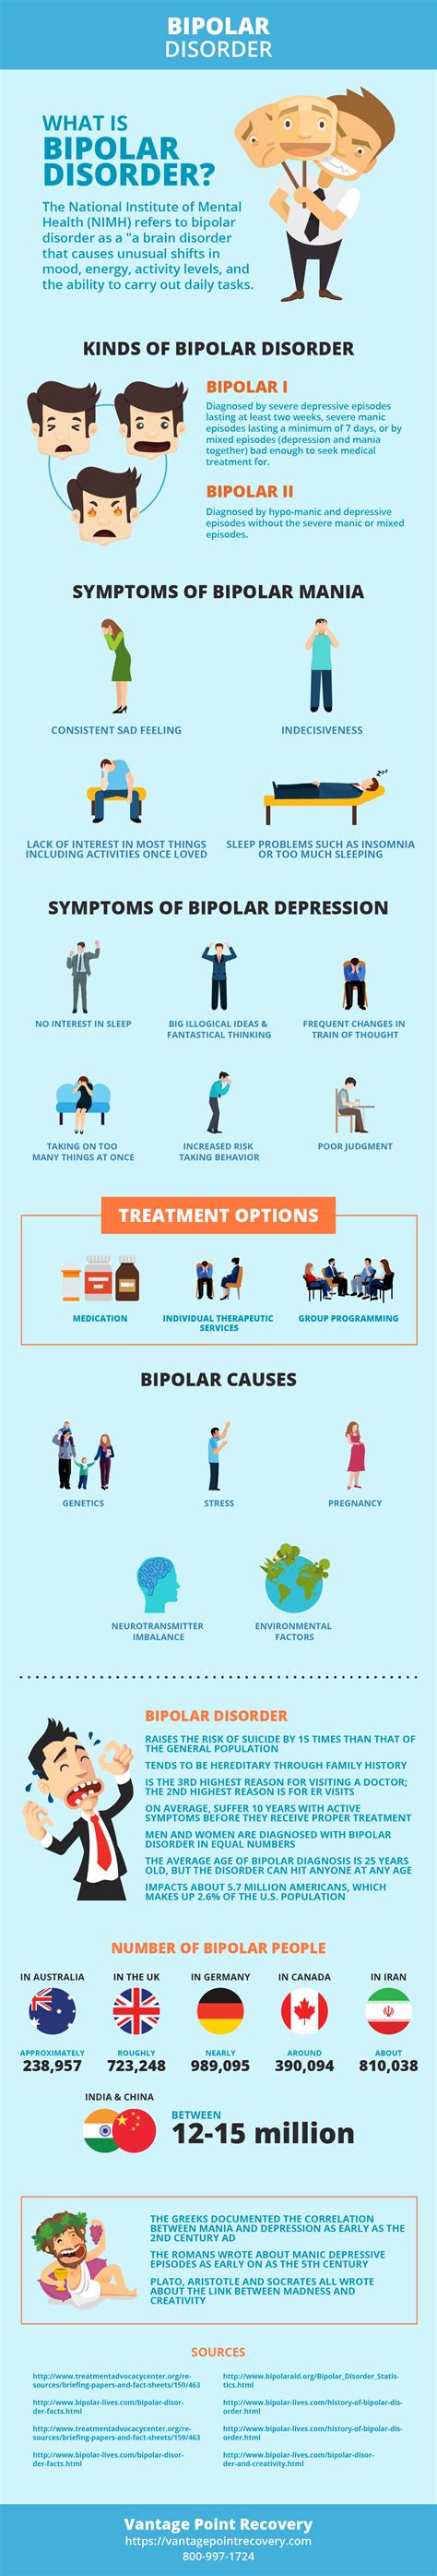 Bipolar disorder causes serious shifts in mood, energy, thinking, and behavior—from the highs of the causes of bipolar disorder aren't completely understood, but it often appears to be hereditary. Bipolar Rehab Center | Disorder Treatment | Professional ...